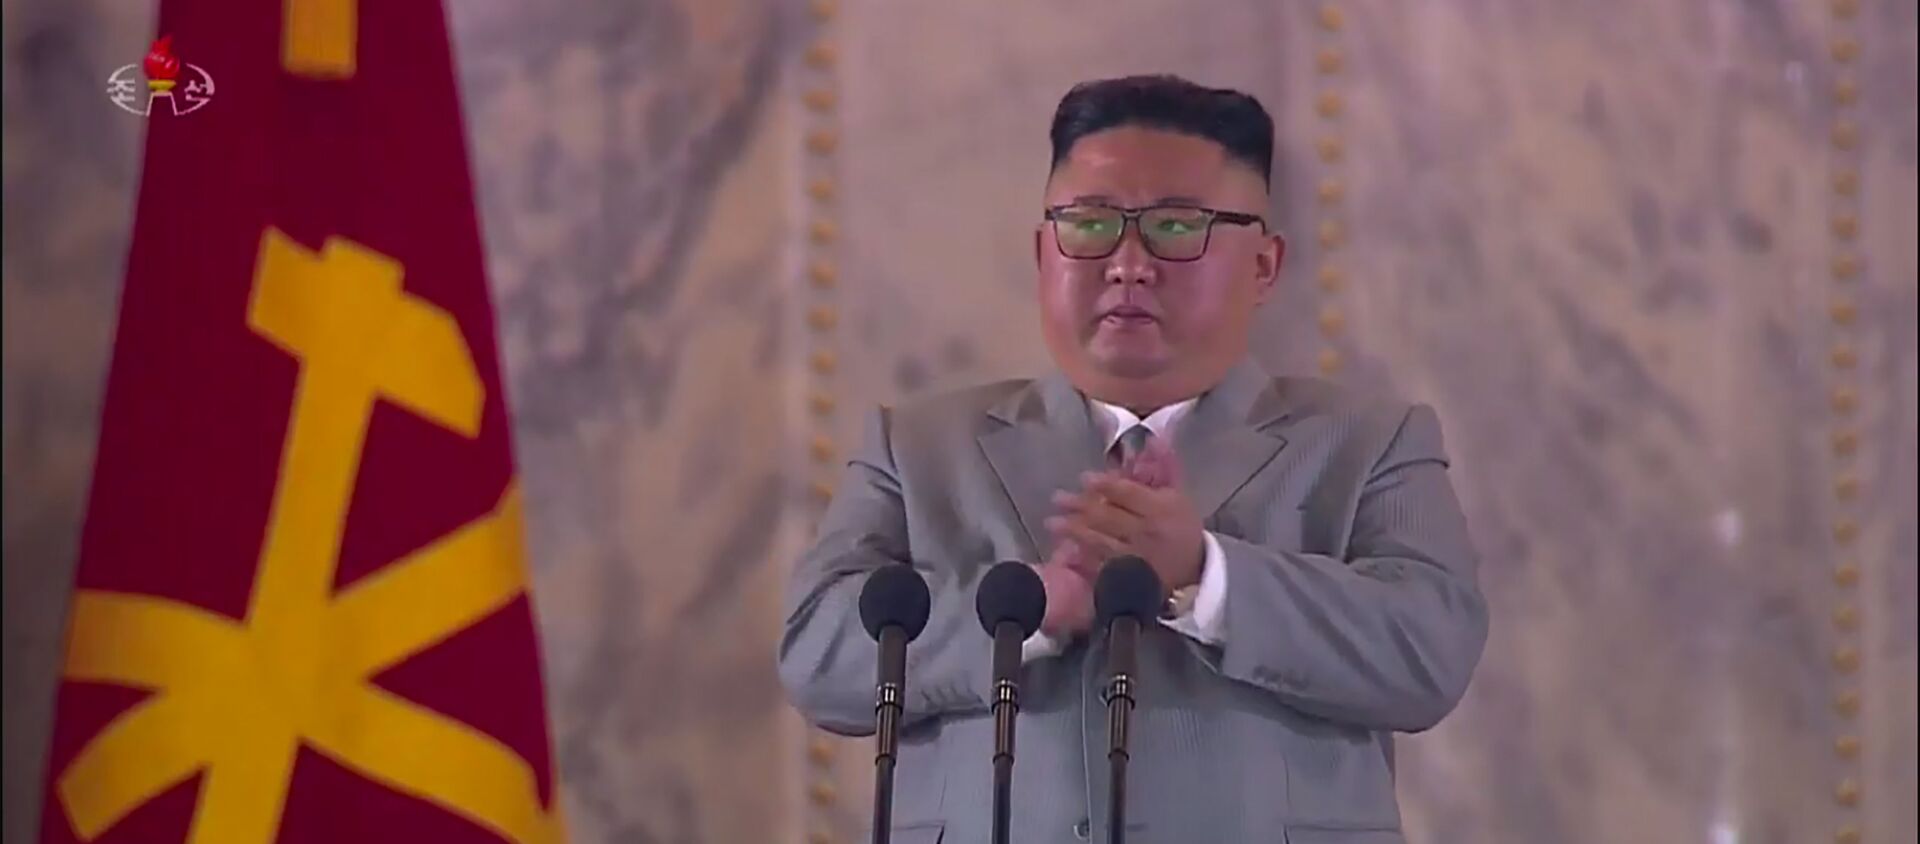 A screen grab taken from a KCNA broadcast on 10 October 2020 shows North Korean leader Kim Jong Un addressing attendees of a military parade on Kim Il Sung square in Pyongyang. - Sputnik International, 1920, 12.10.2020